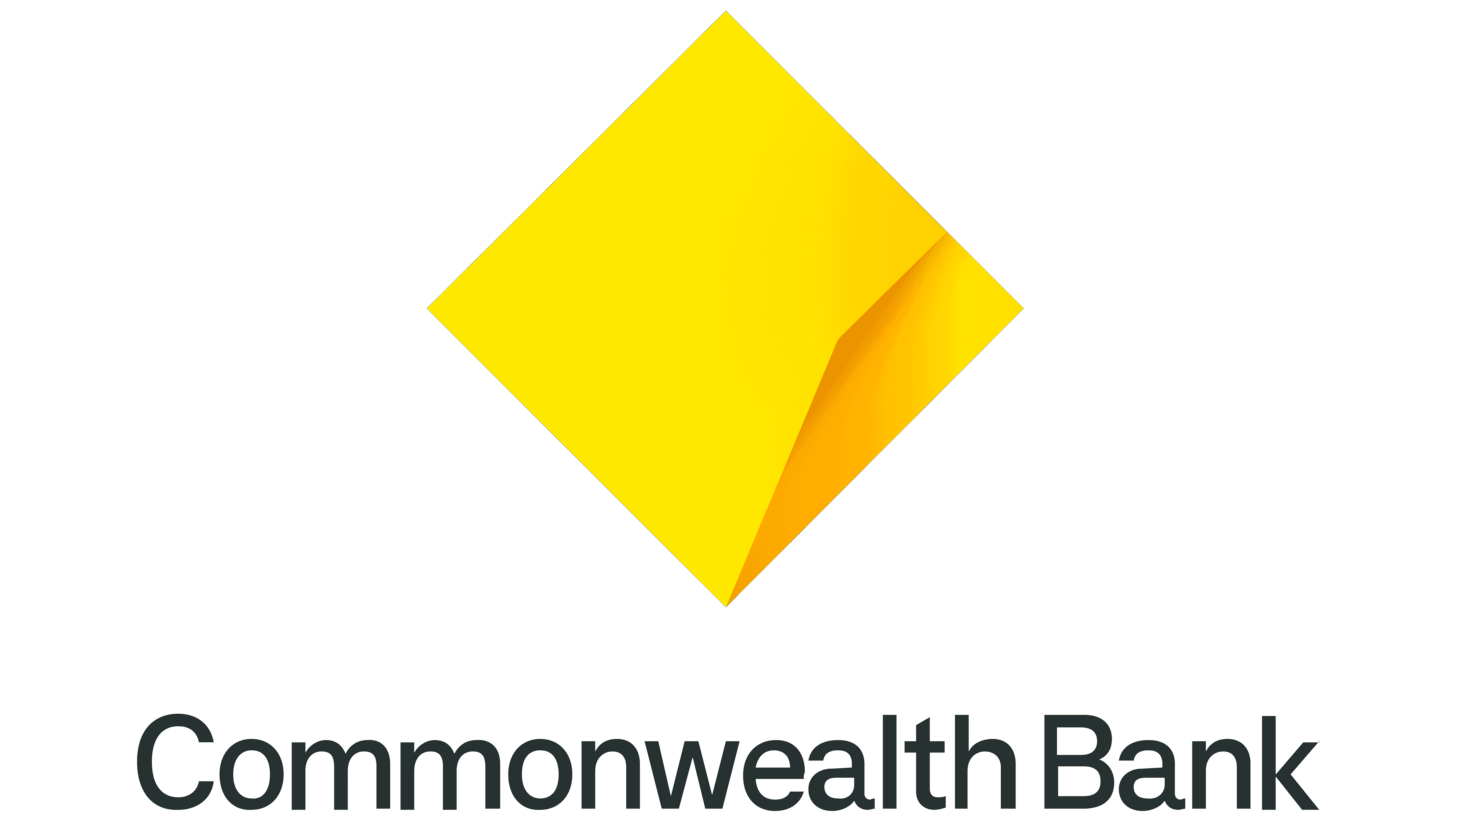 Commonwealth bank sign 2020 present